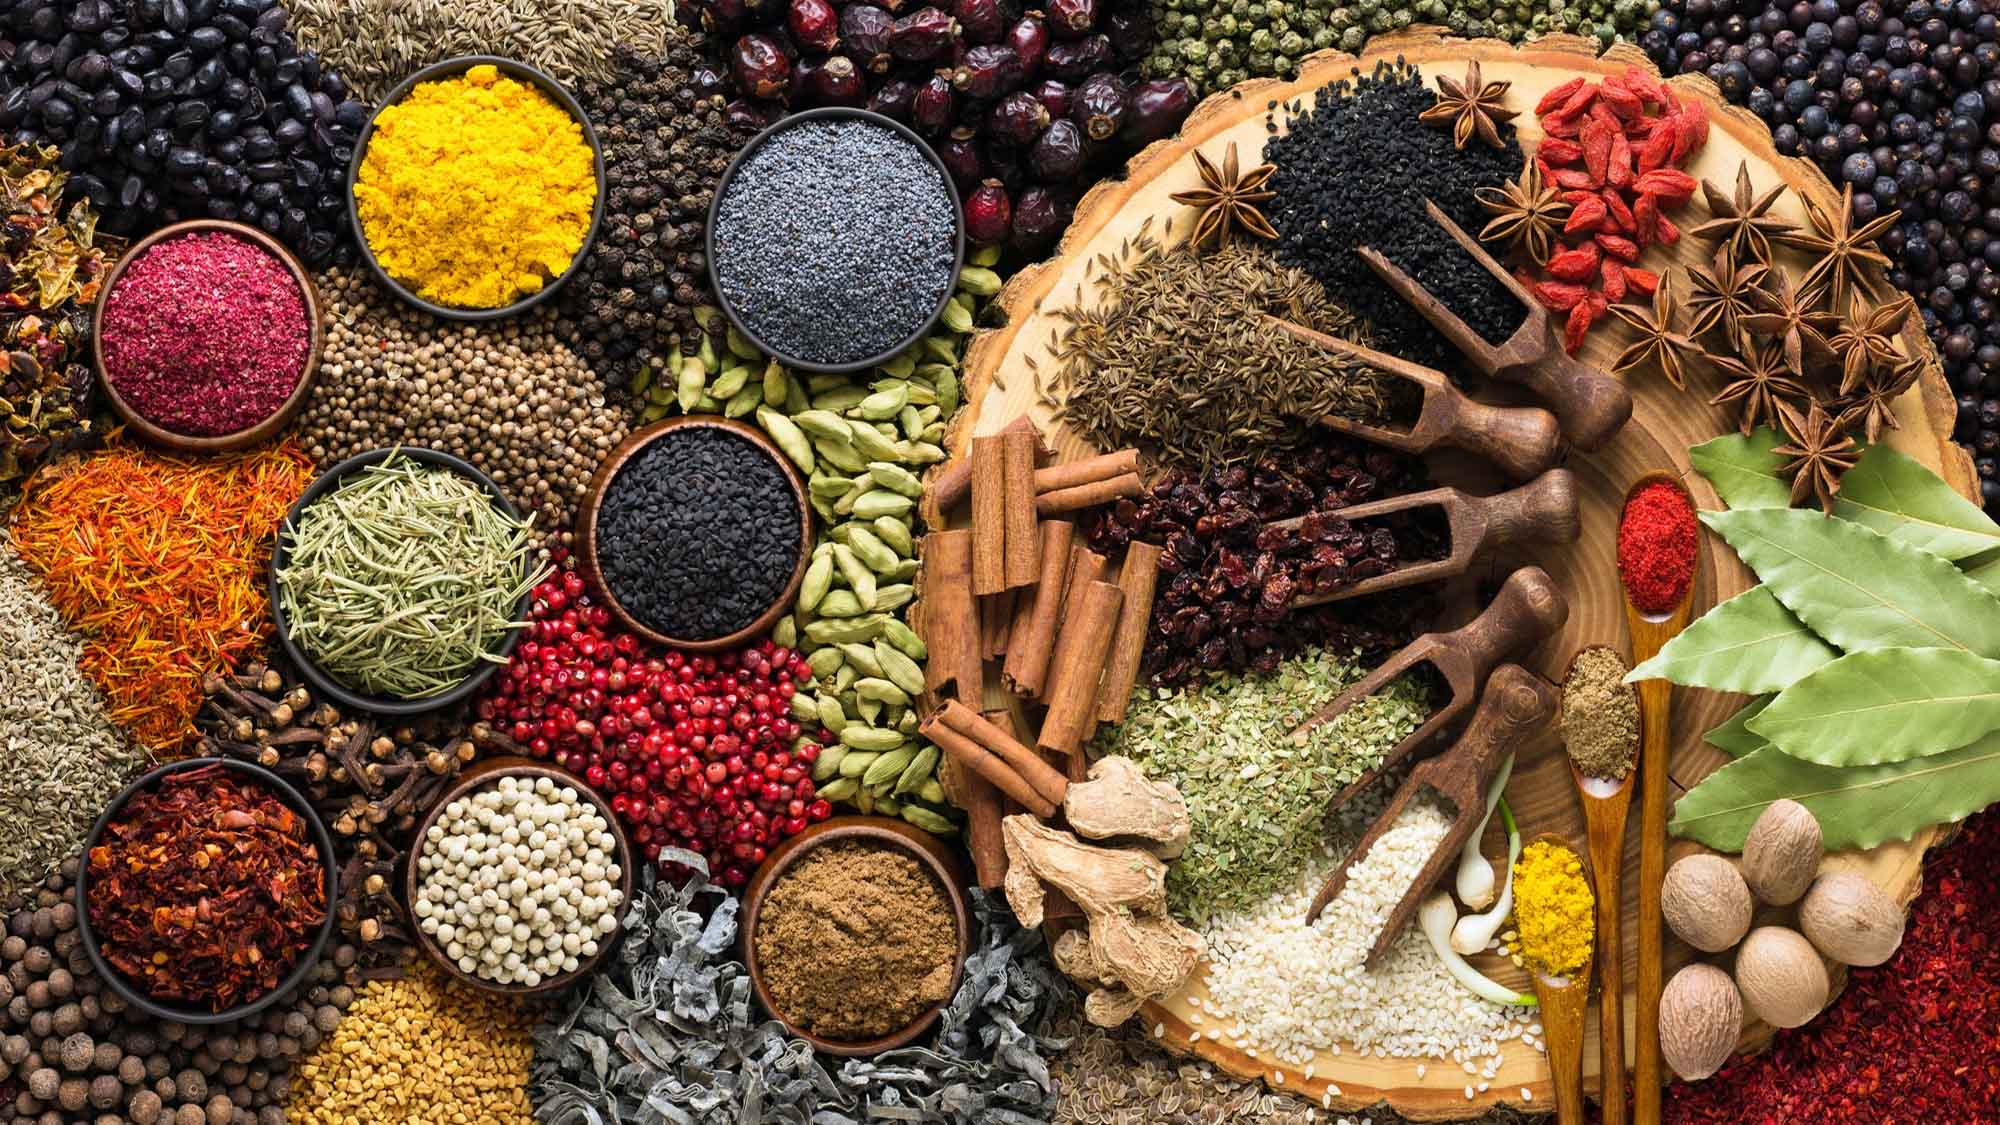 locally-sourced-ingredients-herbs-spices-for-delicious-food